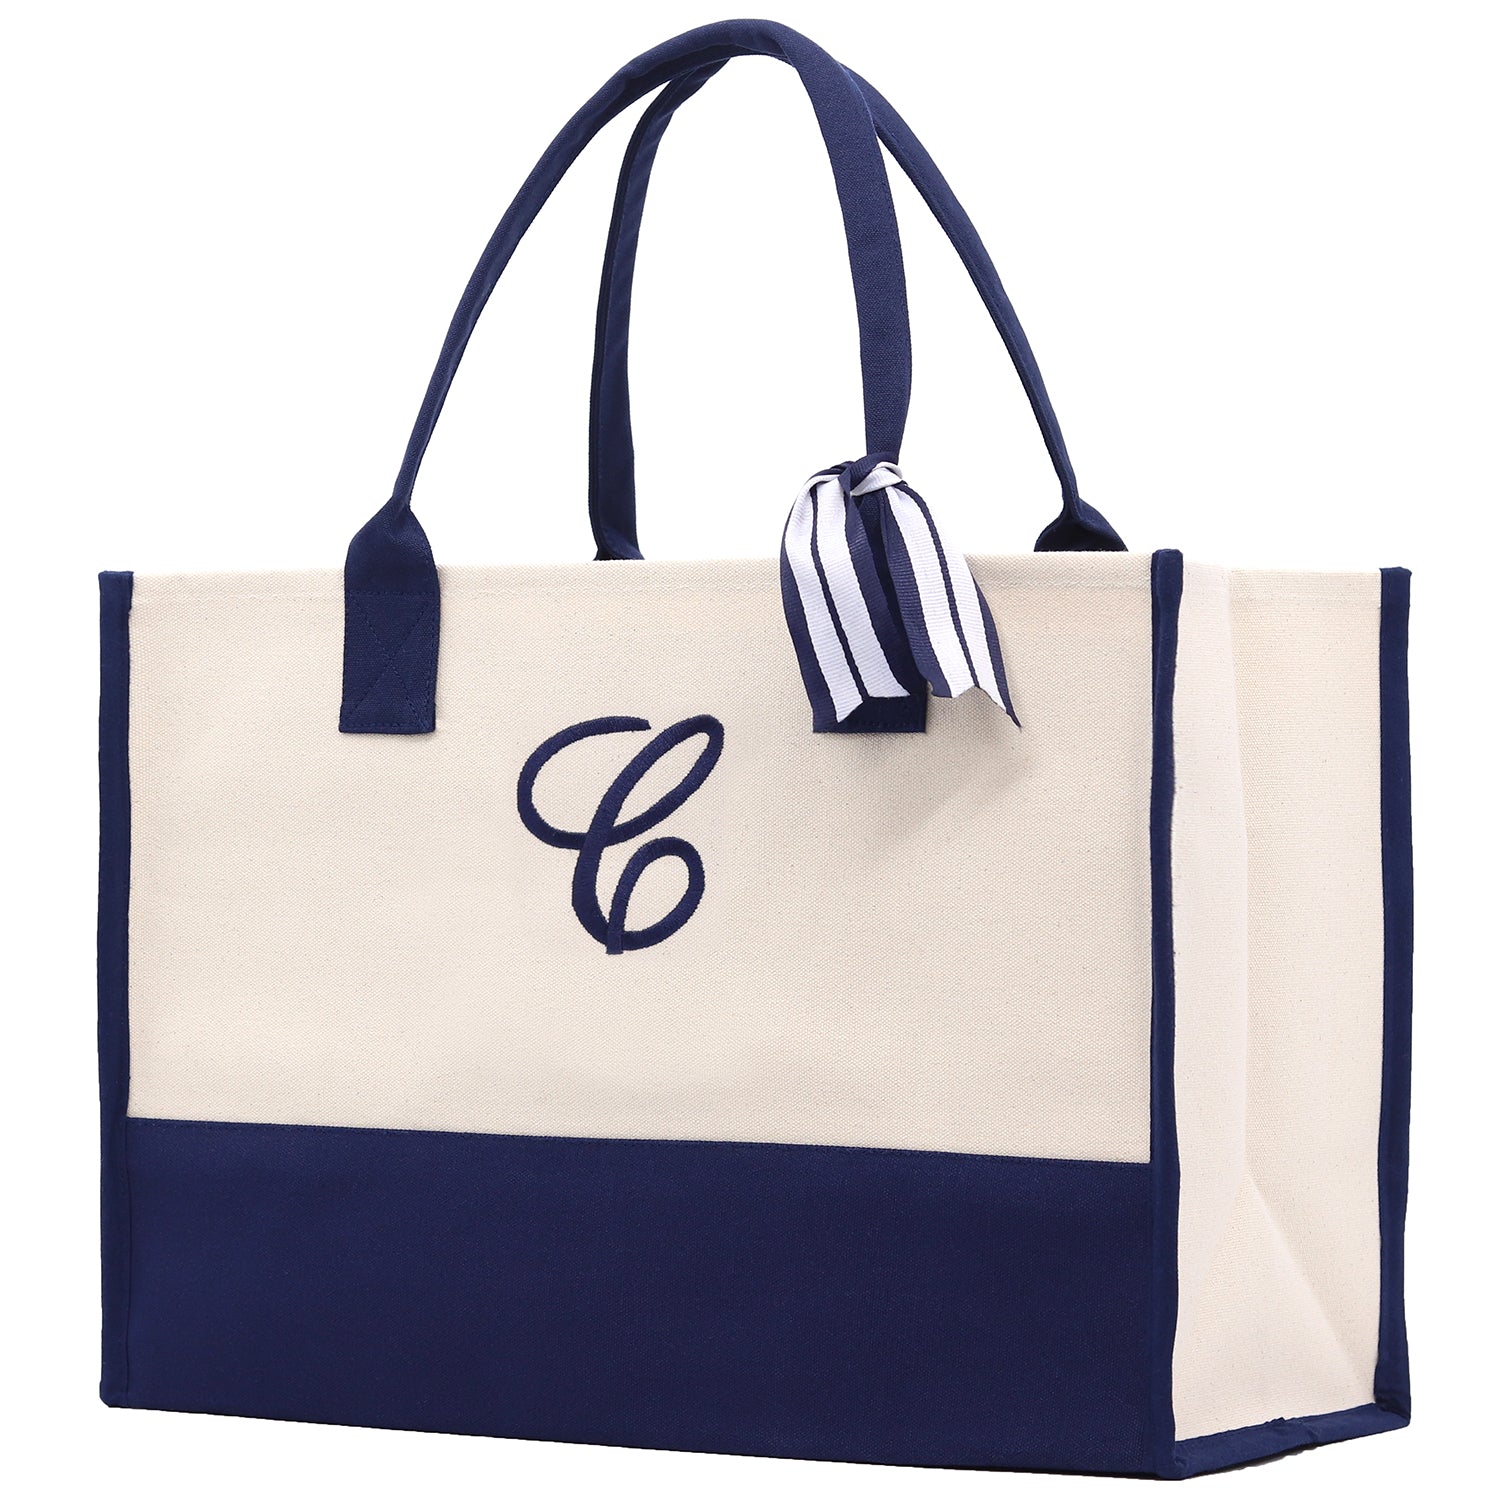 Monogram Tote Bag with 100% Cotton Canvas and a Chic Personalized Monogram Navy Blue Vanessa Rosella Script C 